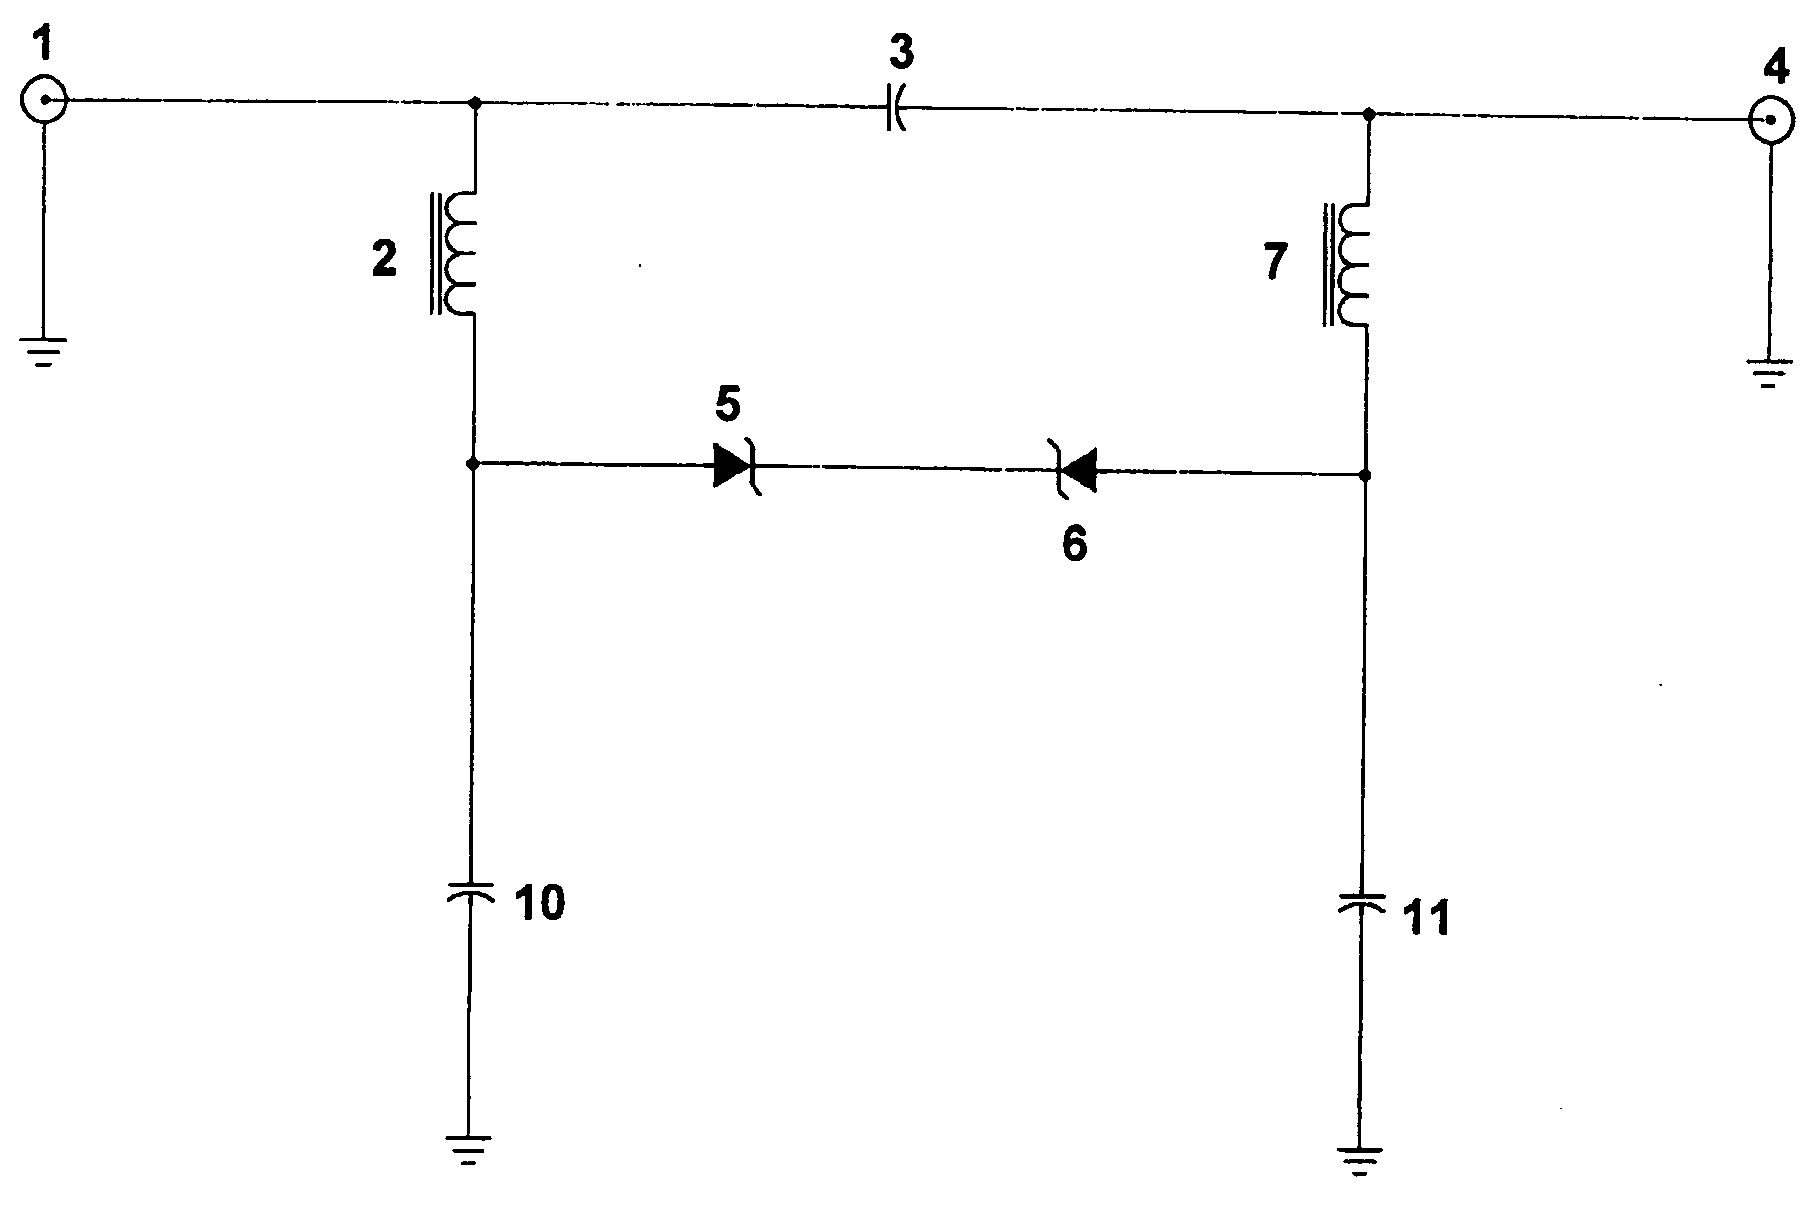 Voltage limiter for coaxial cable carrying RF signals and voltage